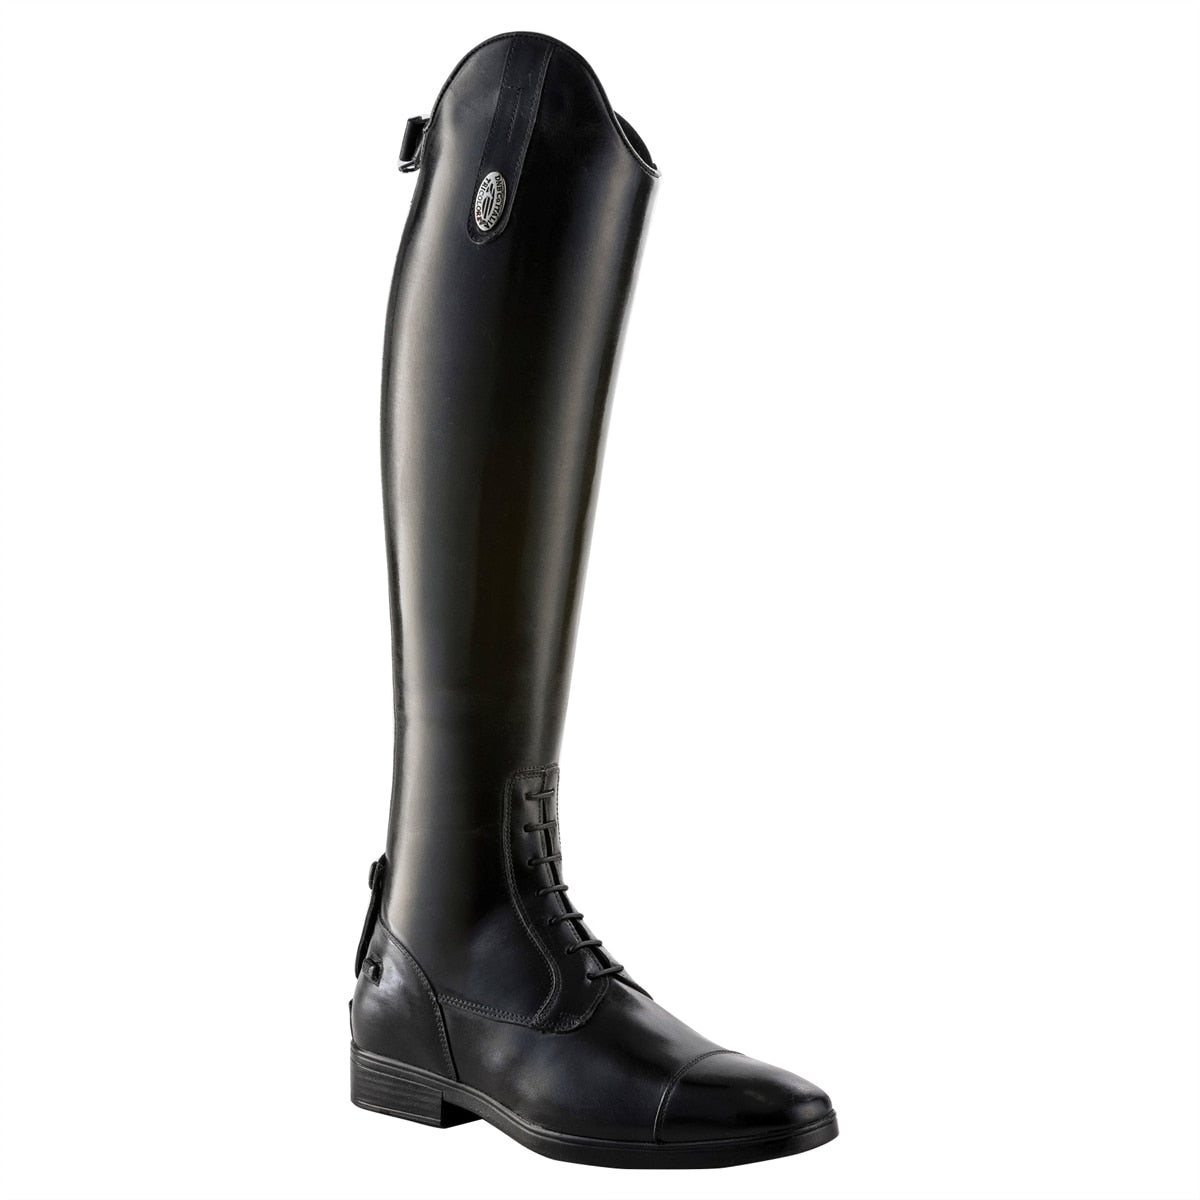 TriColore by DeNiro Amabile Field Boot Smooth Leather, Media Alta (Medium Tall) Height